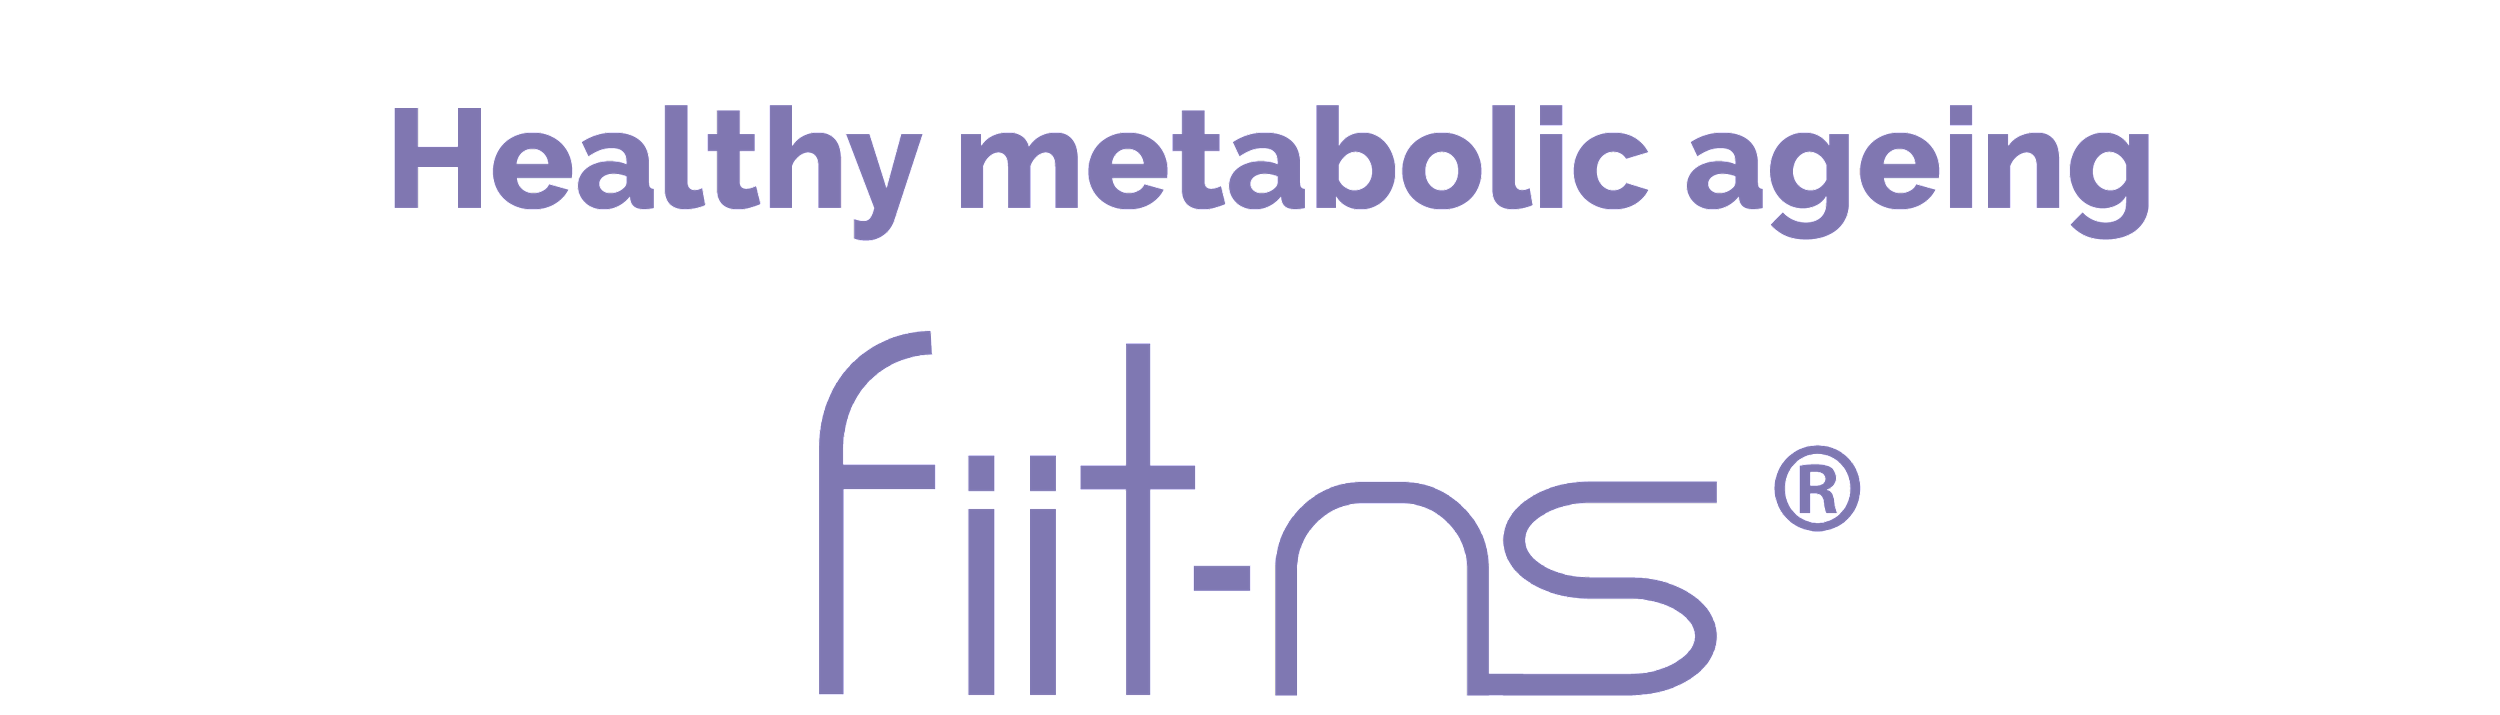 Healthy metabolic ageing